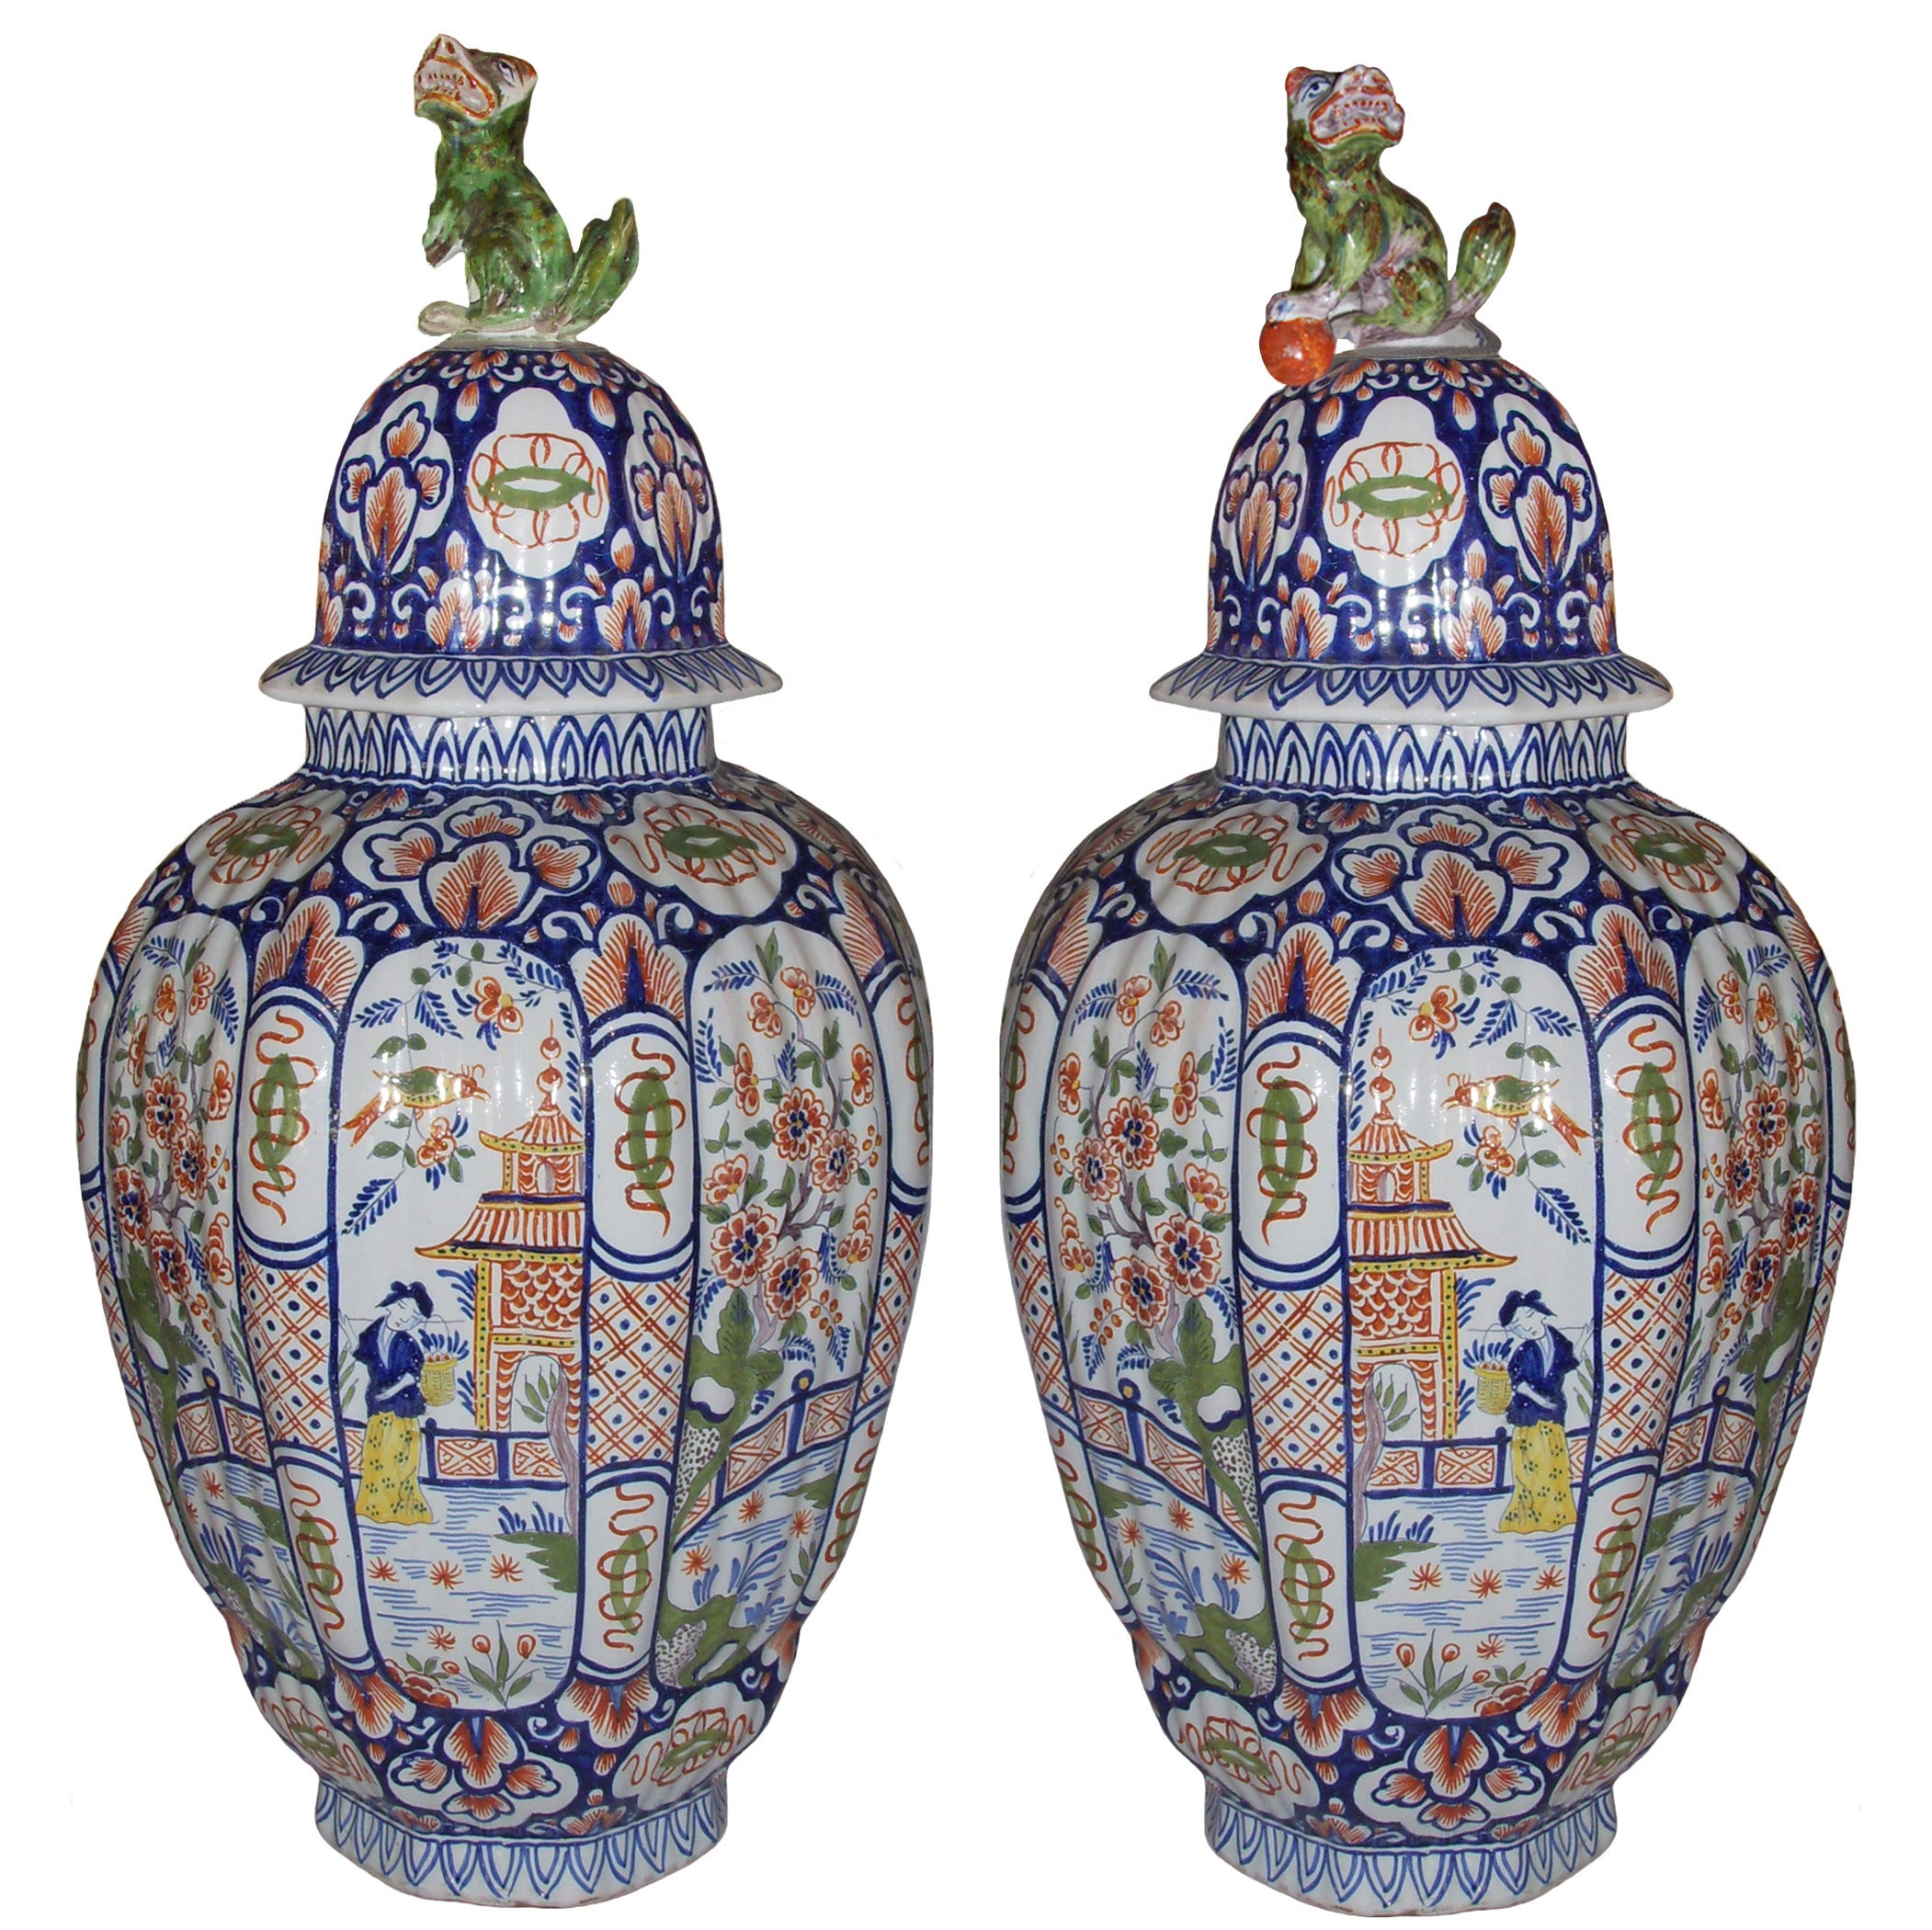 Pair of 19th Century Covered Delft Vases